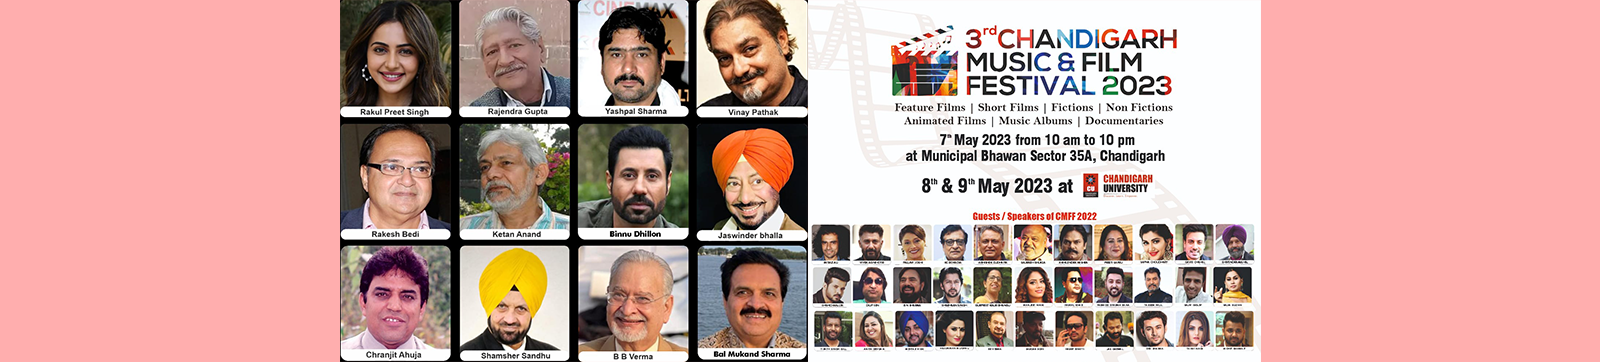 Celebrities’ Galore at 3rd Chandigarh Music & Film Festival Starting May 7